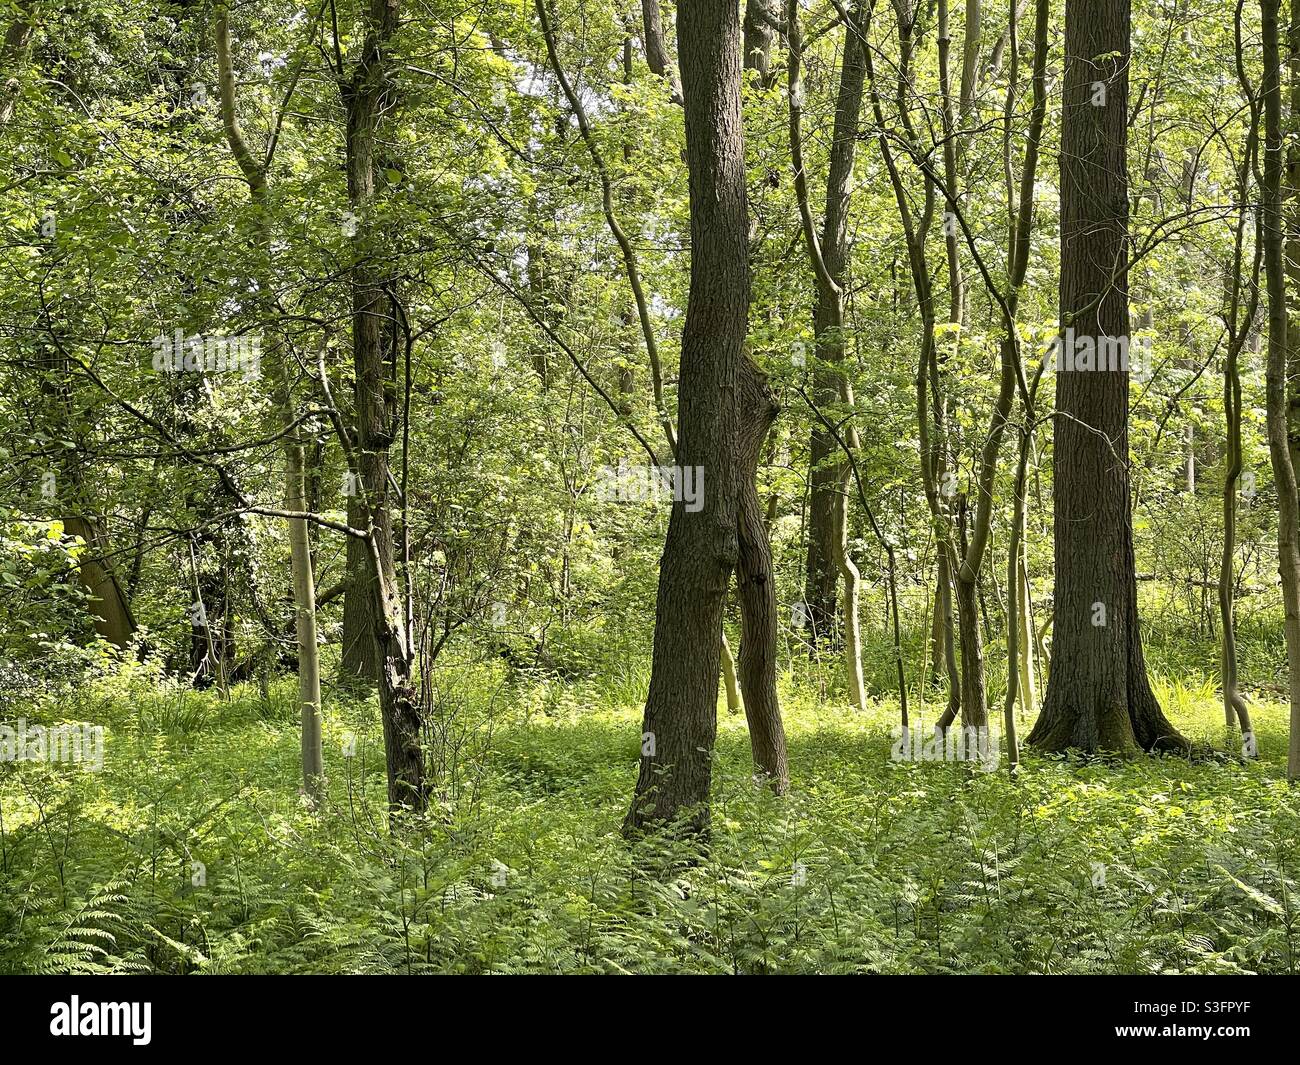 Woodland carpeted in wild ferns Stock Photo